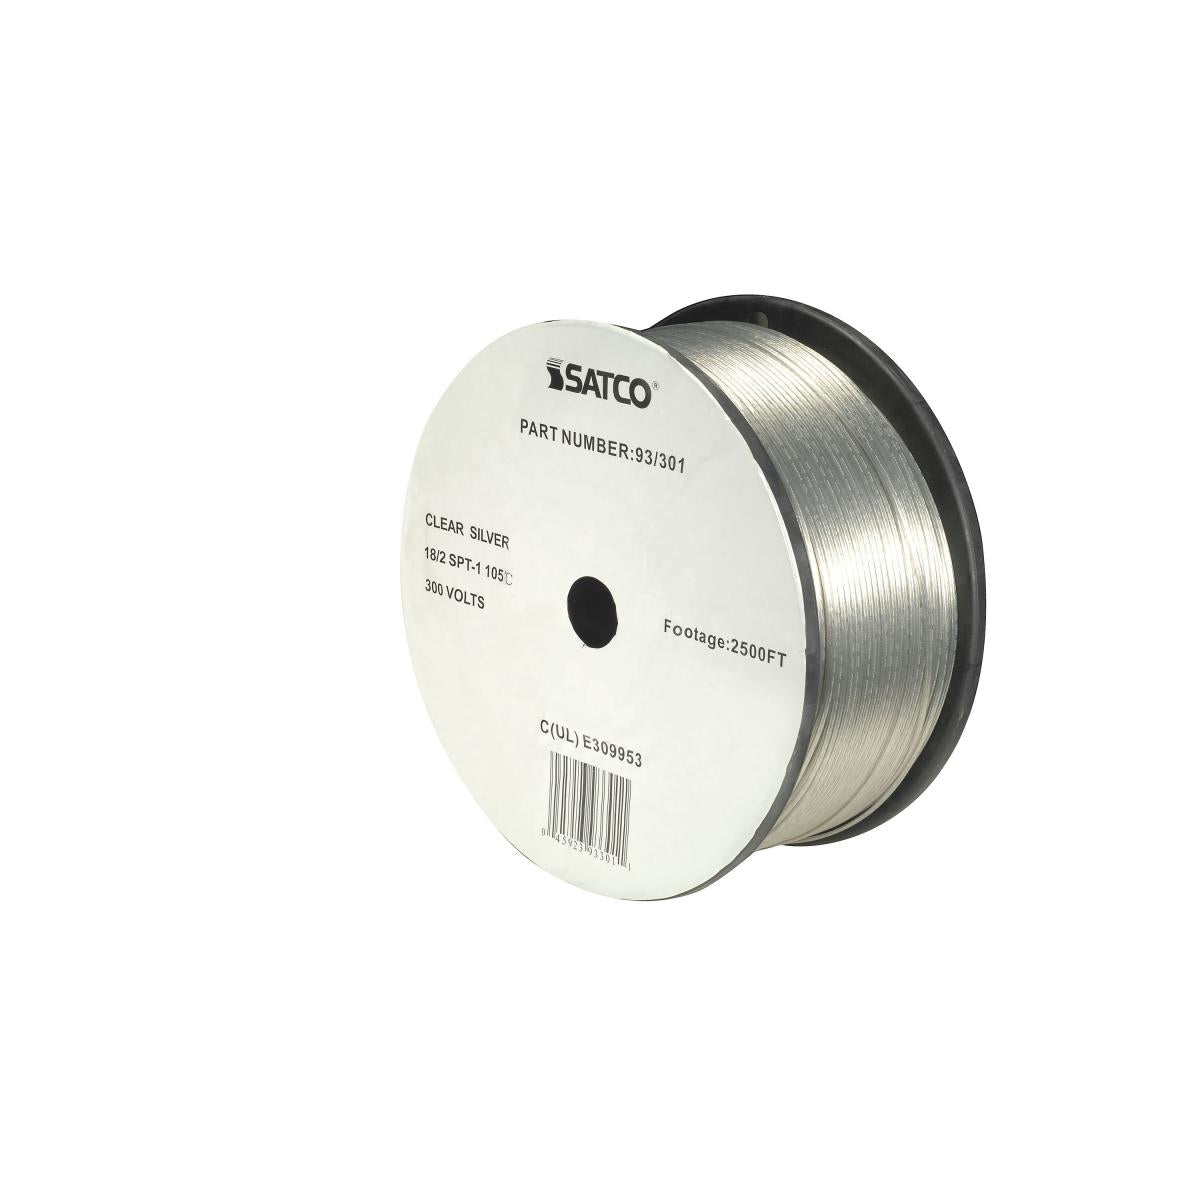 Satco 93-301 Lamp And Lighting Bulk Wire 18/2 SPT-1 105C 2500 Foot/Reel Clear Silver